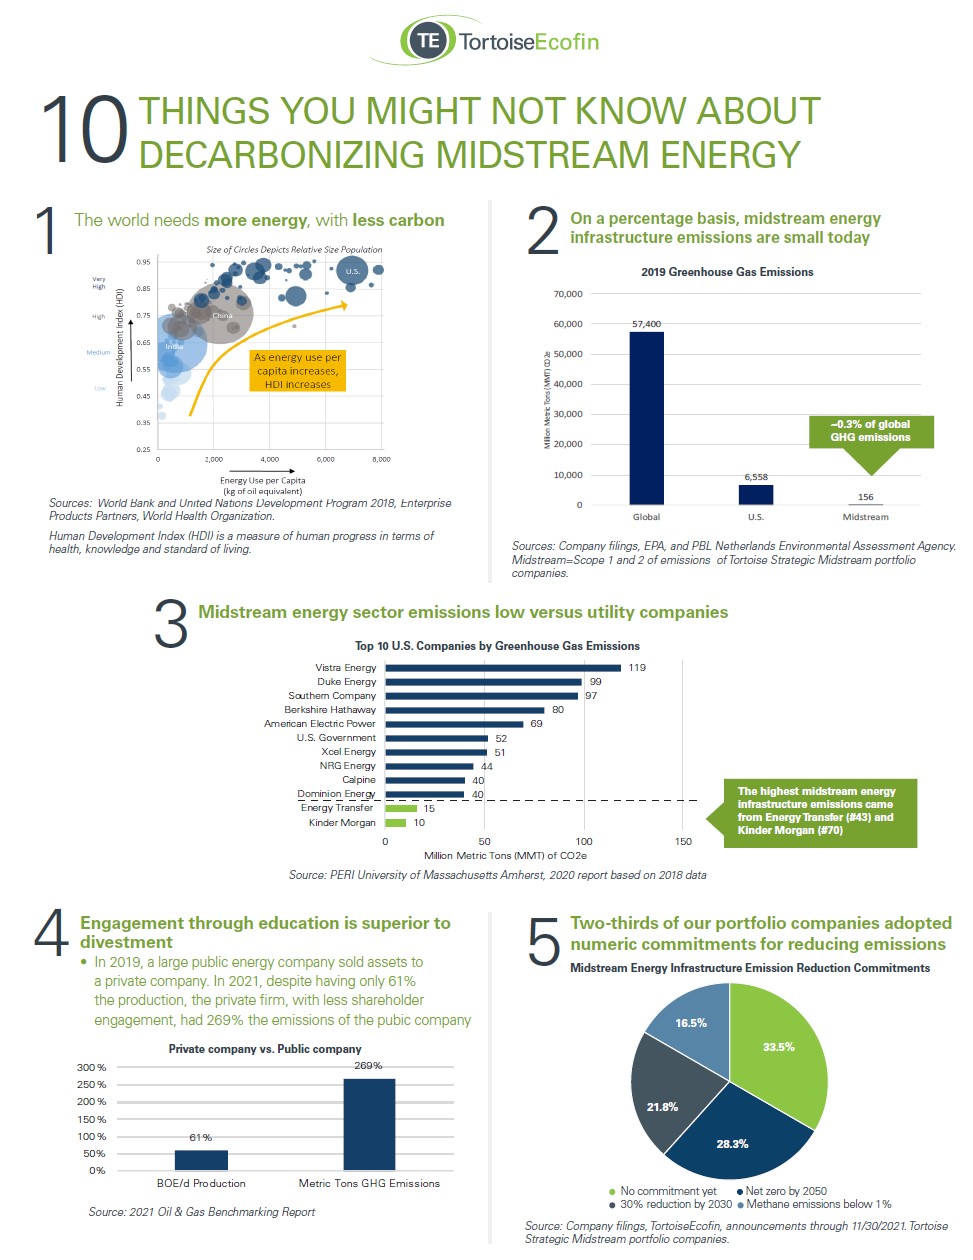 10 things you might not know about decarbonizing midstream energy